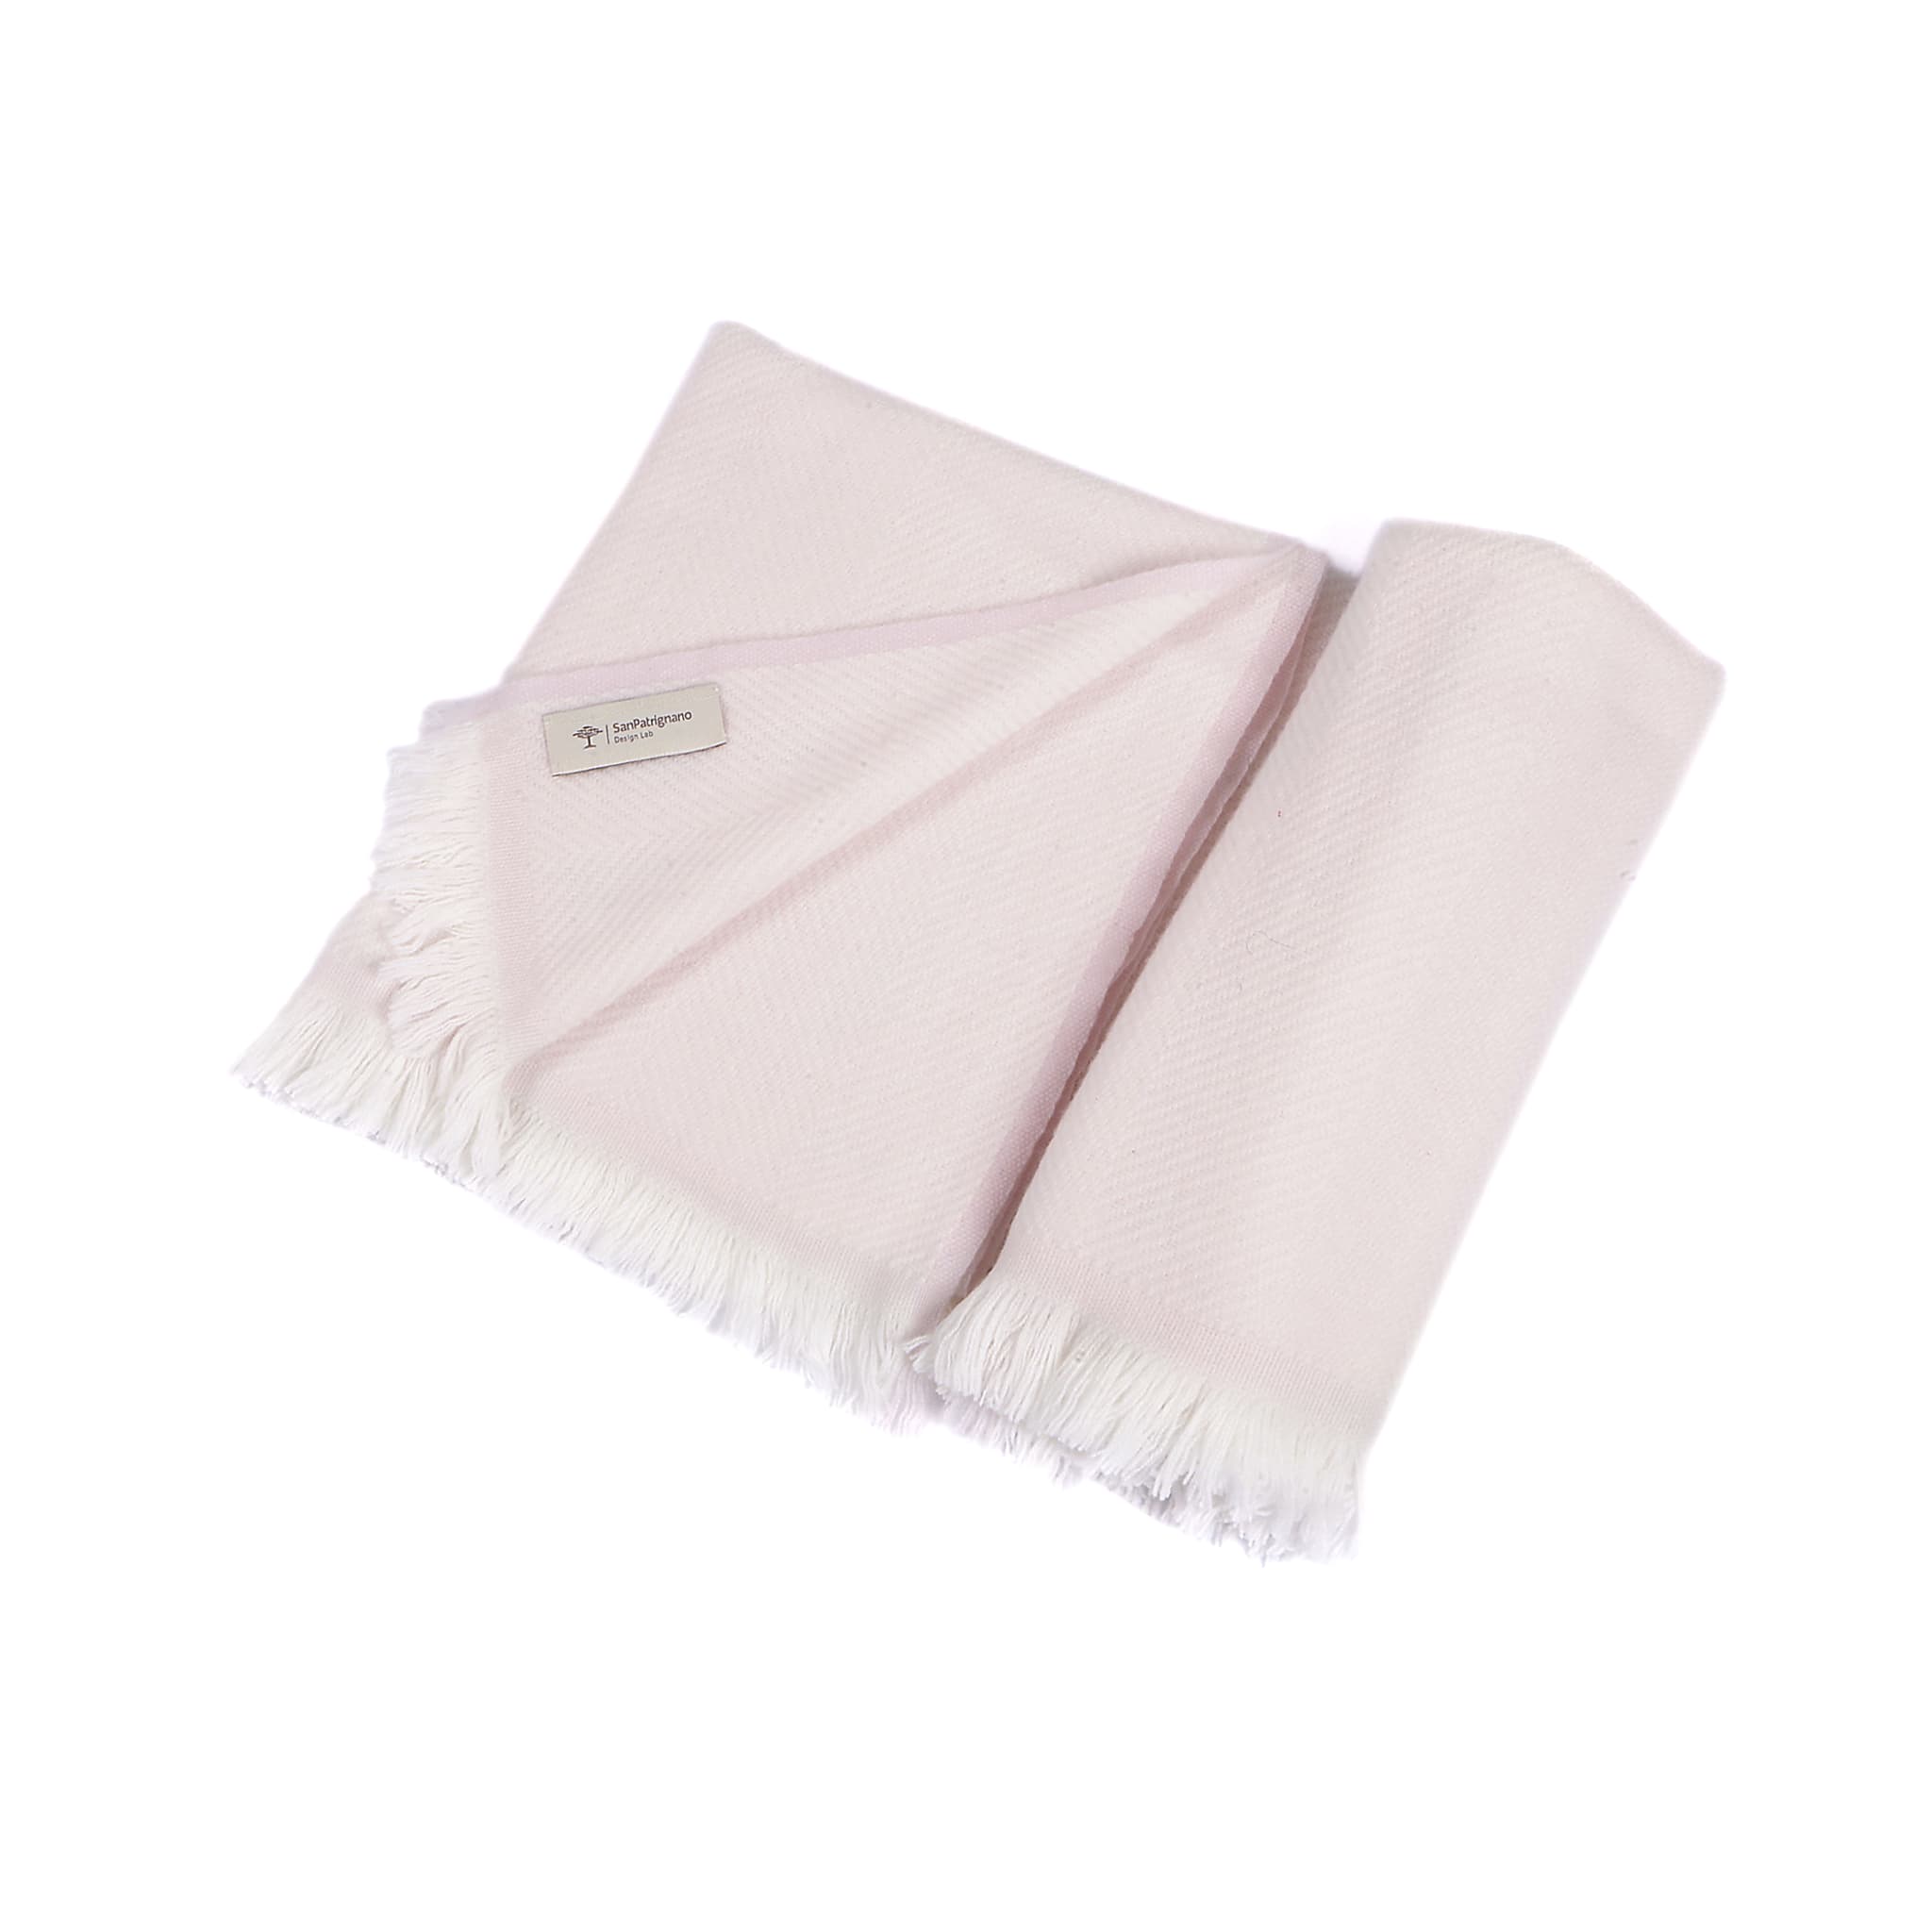 Cream and Soft Pink 100% Cashmere Baby Blanket with short fringes - Main view